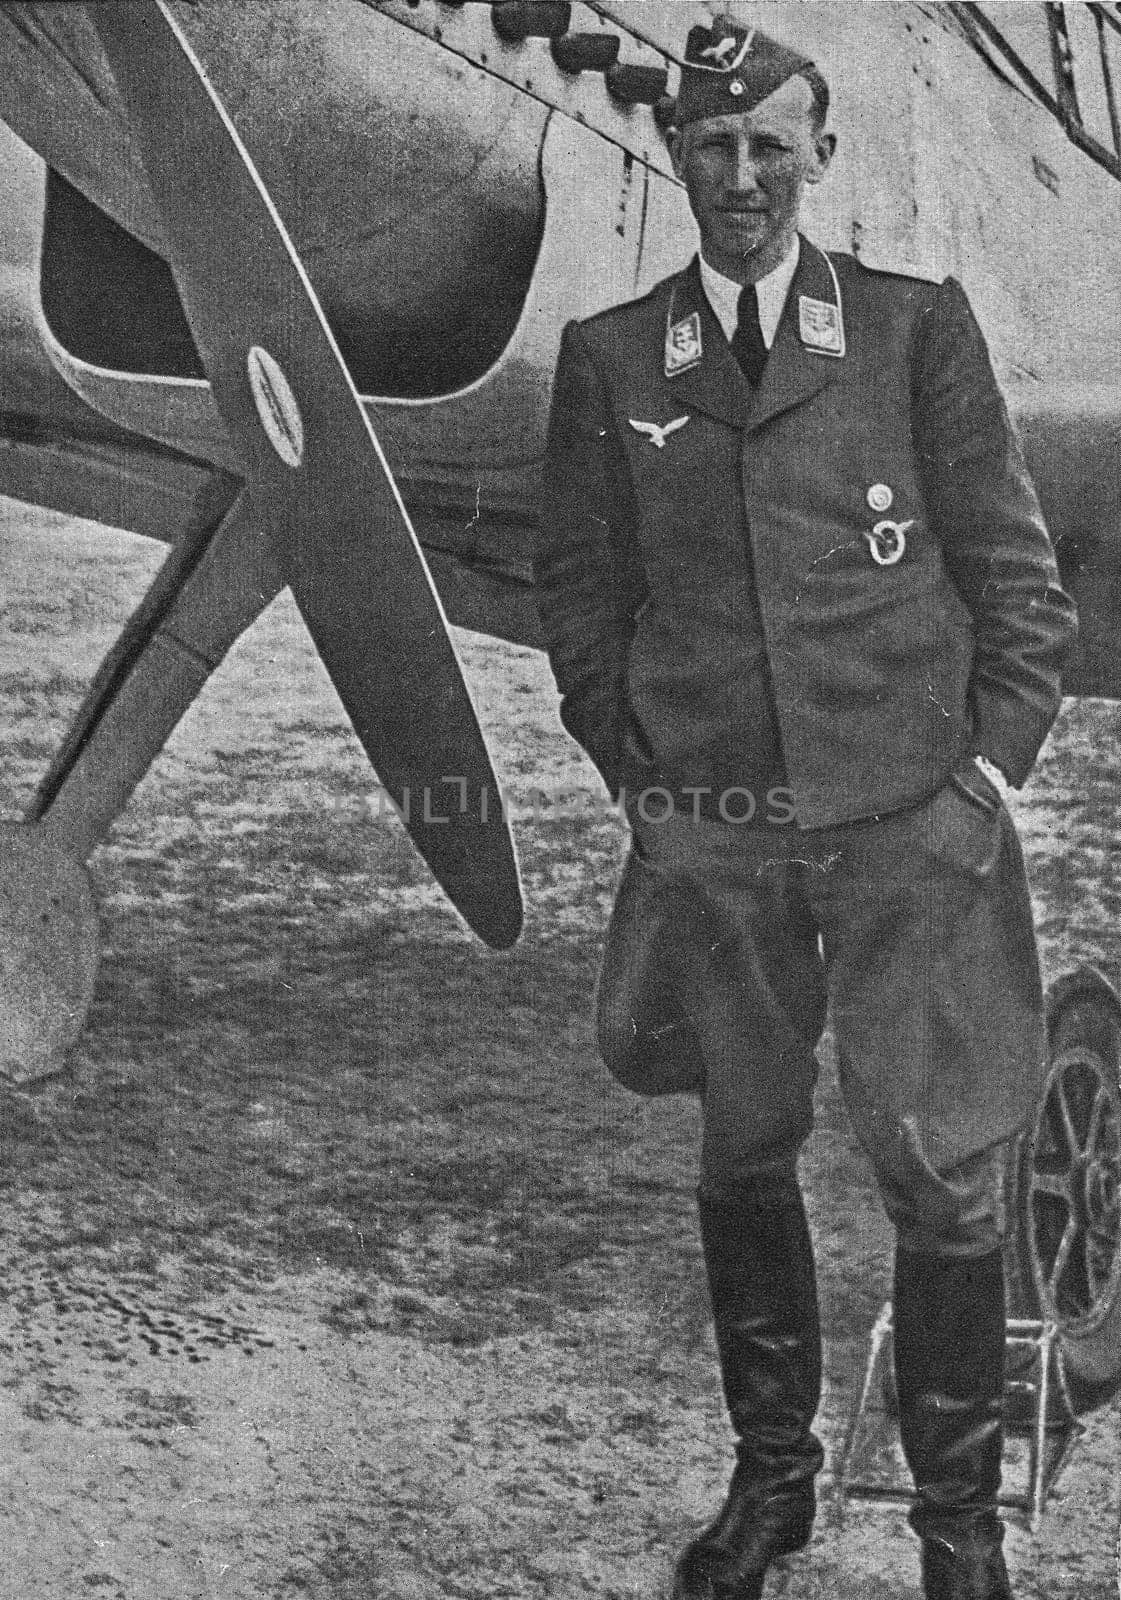 NORWAY - 1930s: Reinhard Heydrich was also a major in the Luftwaffe, flying nearly 100 combat missions until 22 July 1941, when his plane was hit by Soviet anti-aircraft fire. Heydrich made an emergency landing behind enemy lines. He evaded a Soviet patrol and contacted a forward German patrol.